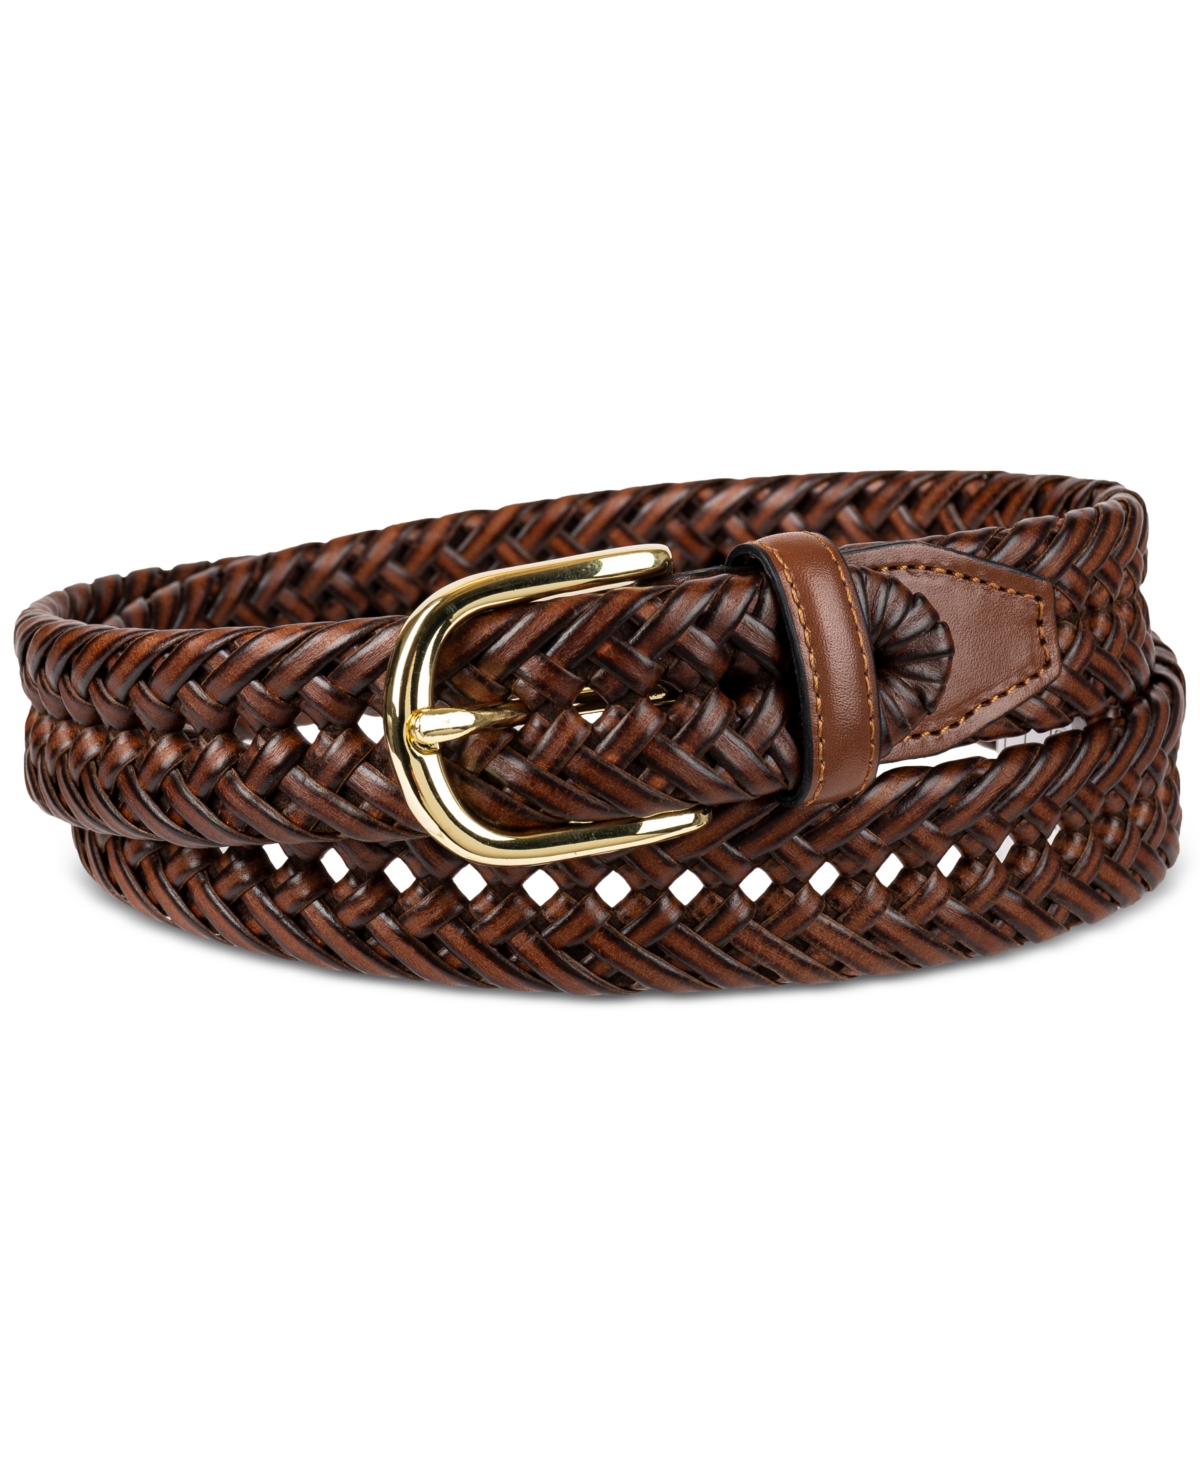 Club Room Men's Hand-Laced Braided Belt, Created for Macy's